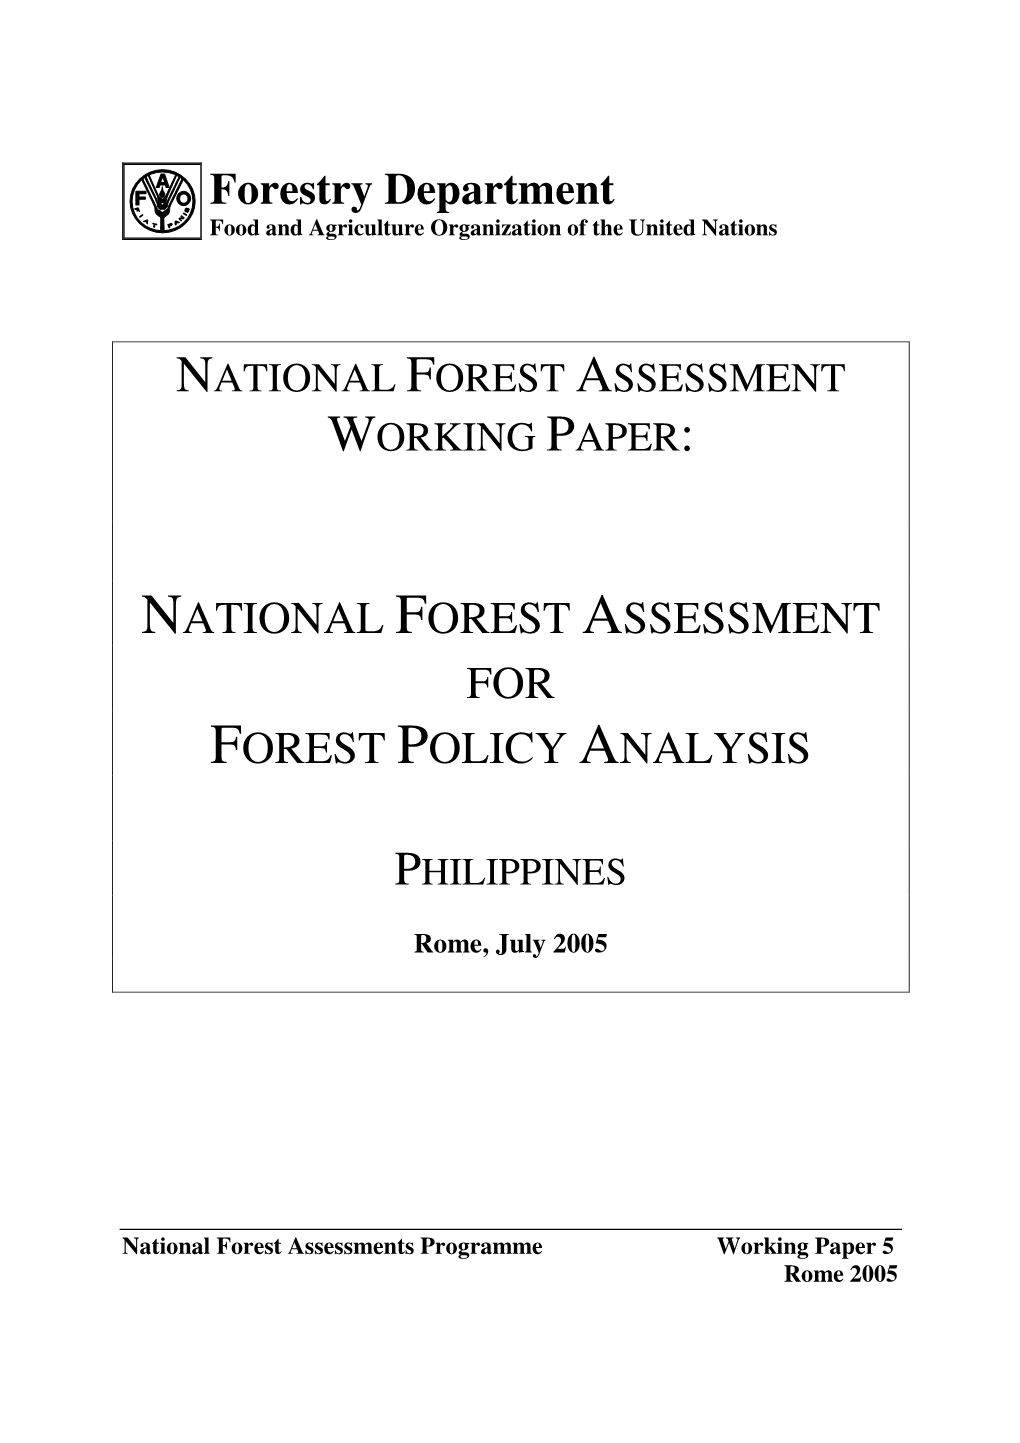 Forestry Department NATIONAL FOREST ASSESSMENT FOR